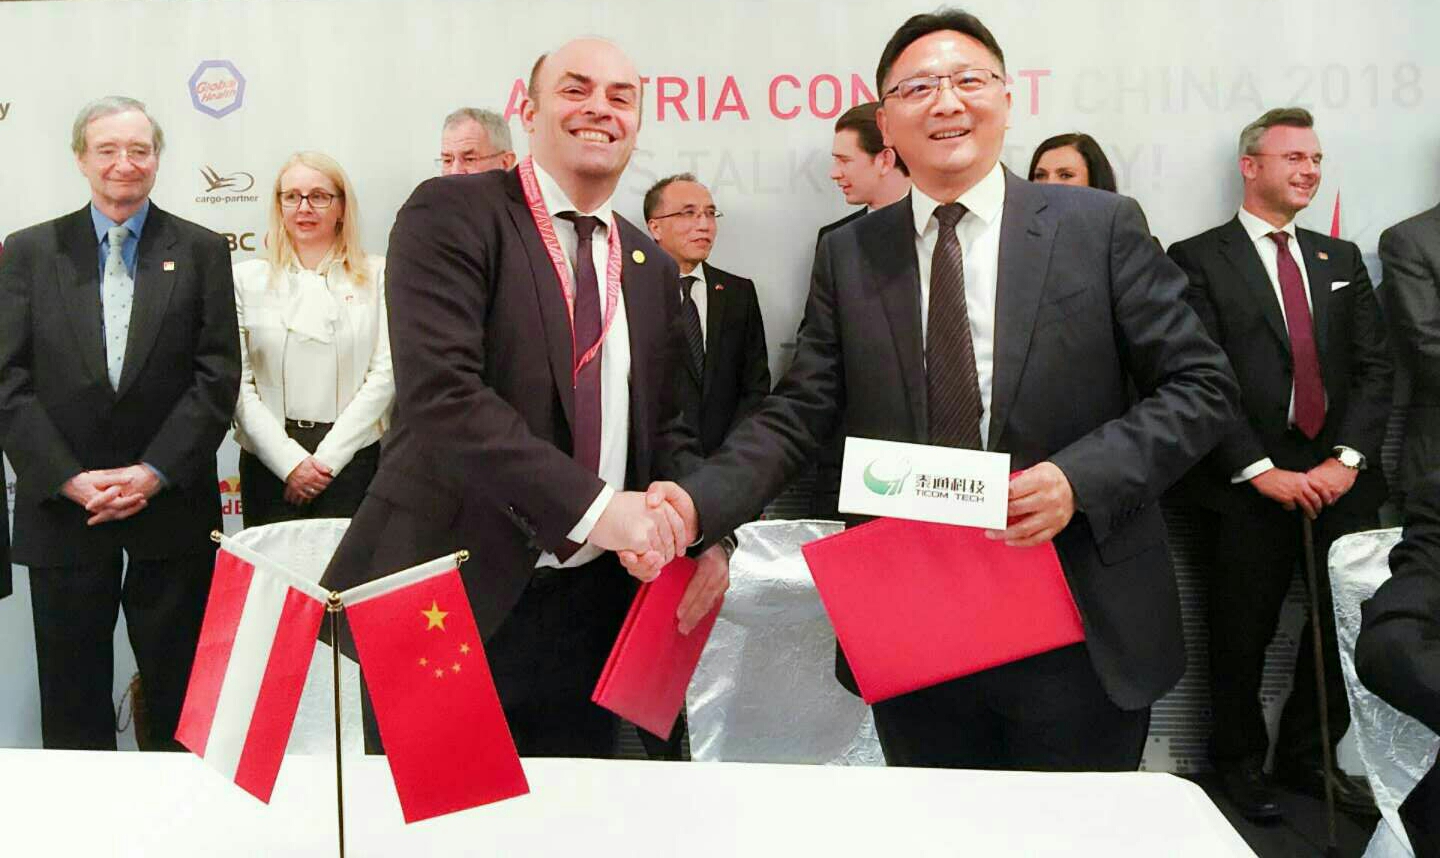 “CHINA &AUSTRIA BLOCK TRAIN SETTING SAIL” —TICOM SHAKING HANDS WITH KAPSCH FOR COOPERATION